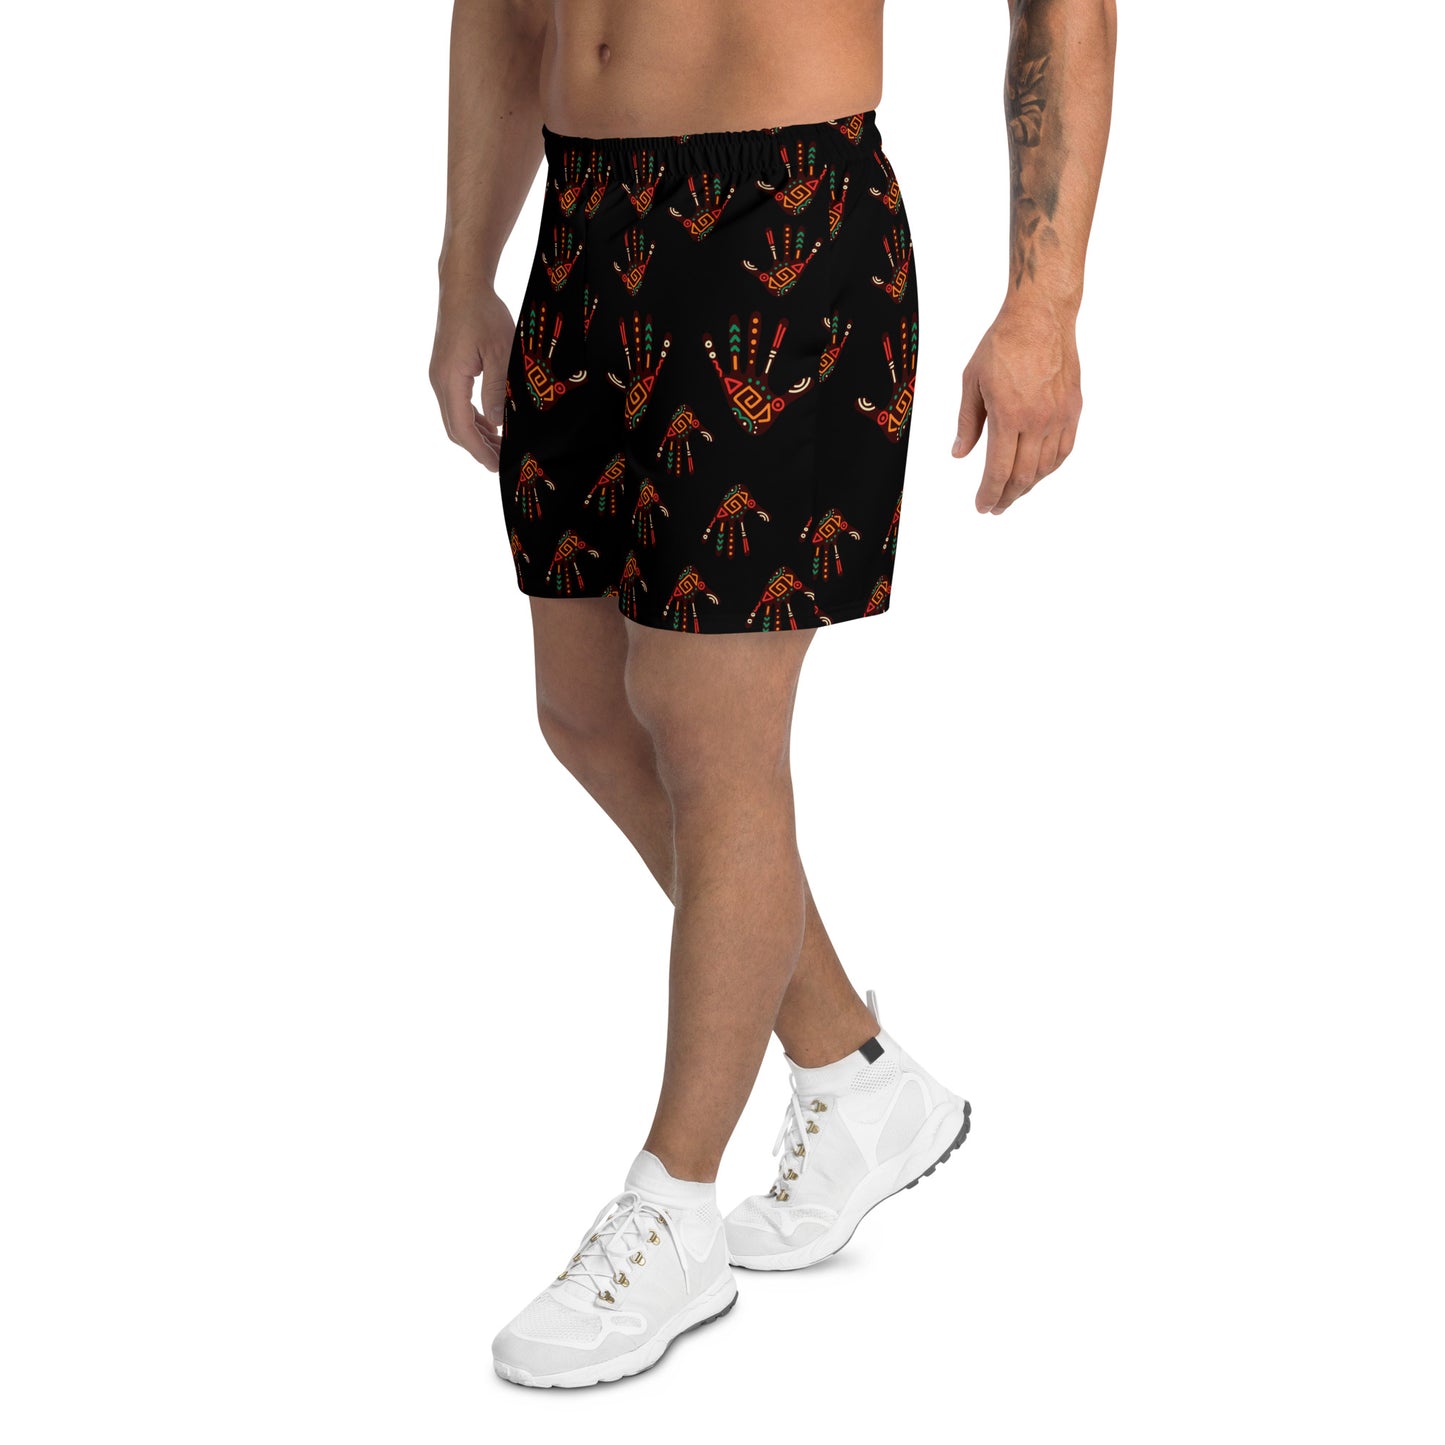 Duro Tribal Palm Print Men's Recycled Athletic Shorts